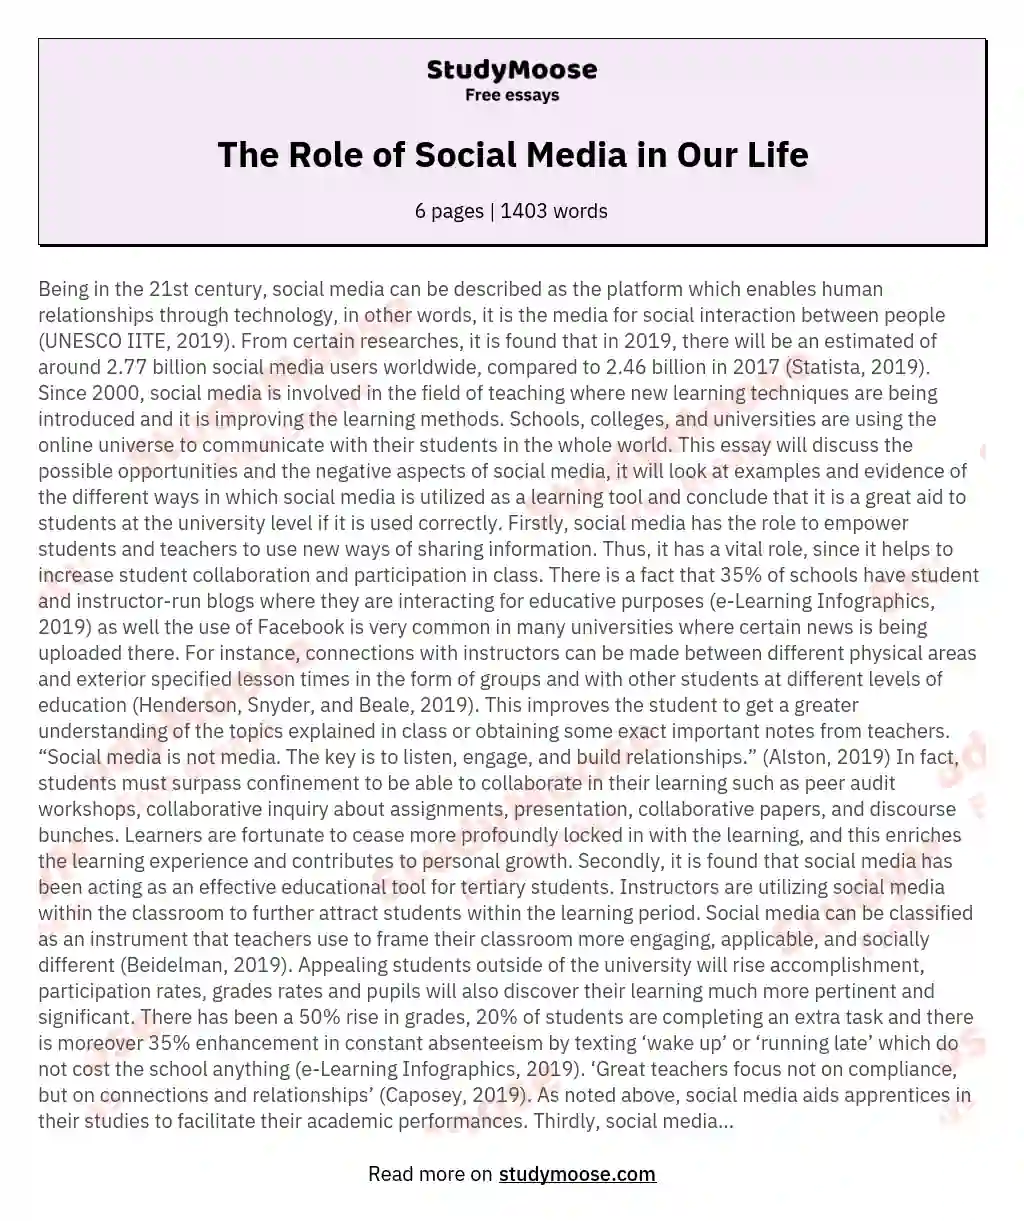 The Role of Social Media in Our Life